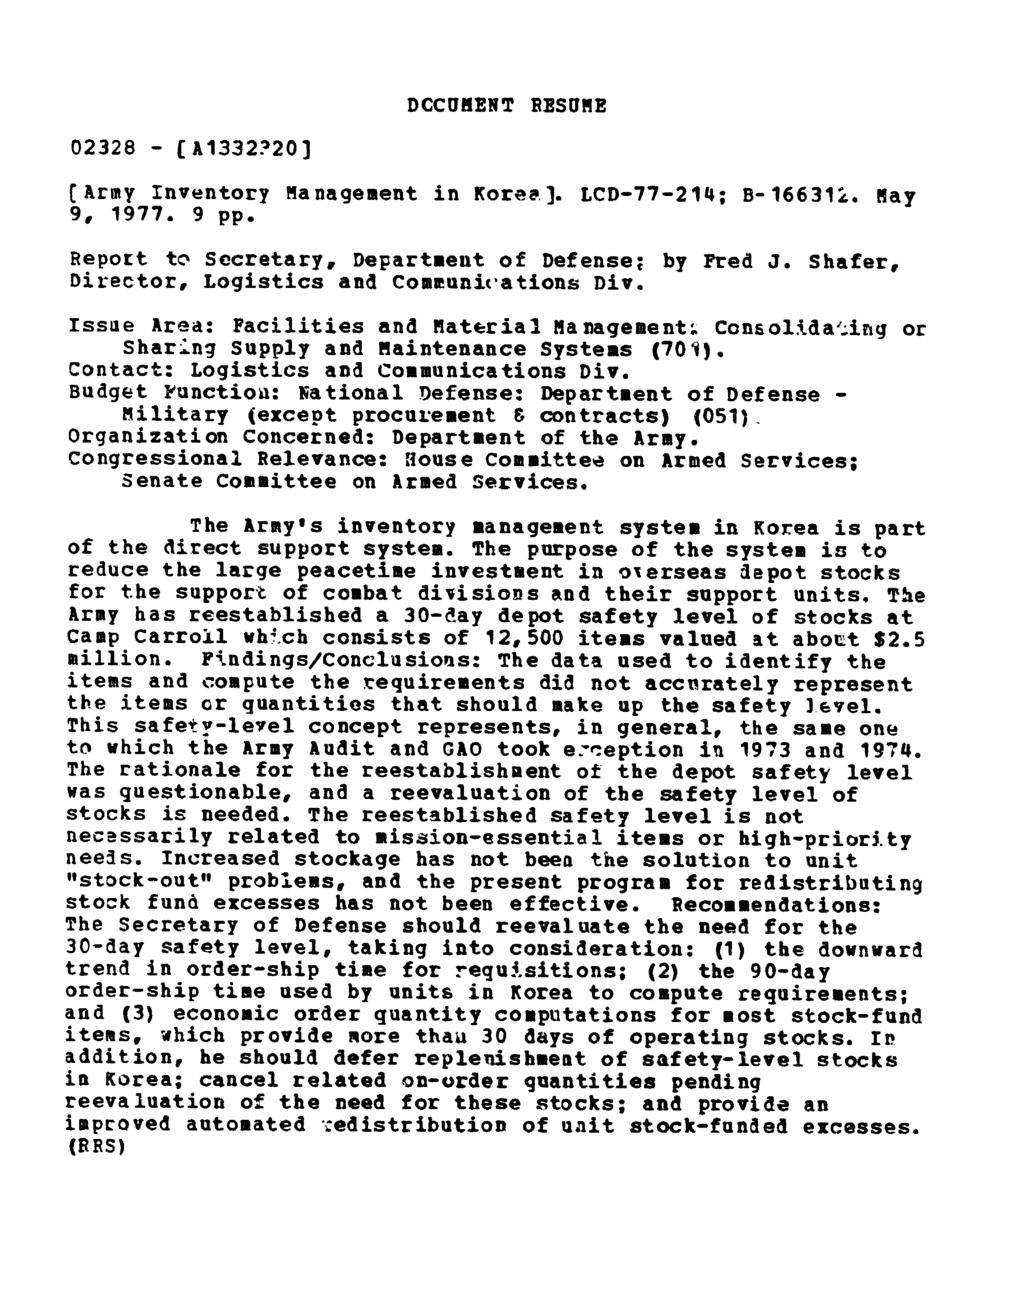 DCCUMENT RESUME 02328 - [A1332?20] (Army Inventory Management in Korea.]. LCD-77-214; B-166312. May 9, 1977. 9 pp. Report to Secretary, Department of Defense; by Fred J.